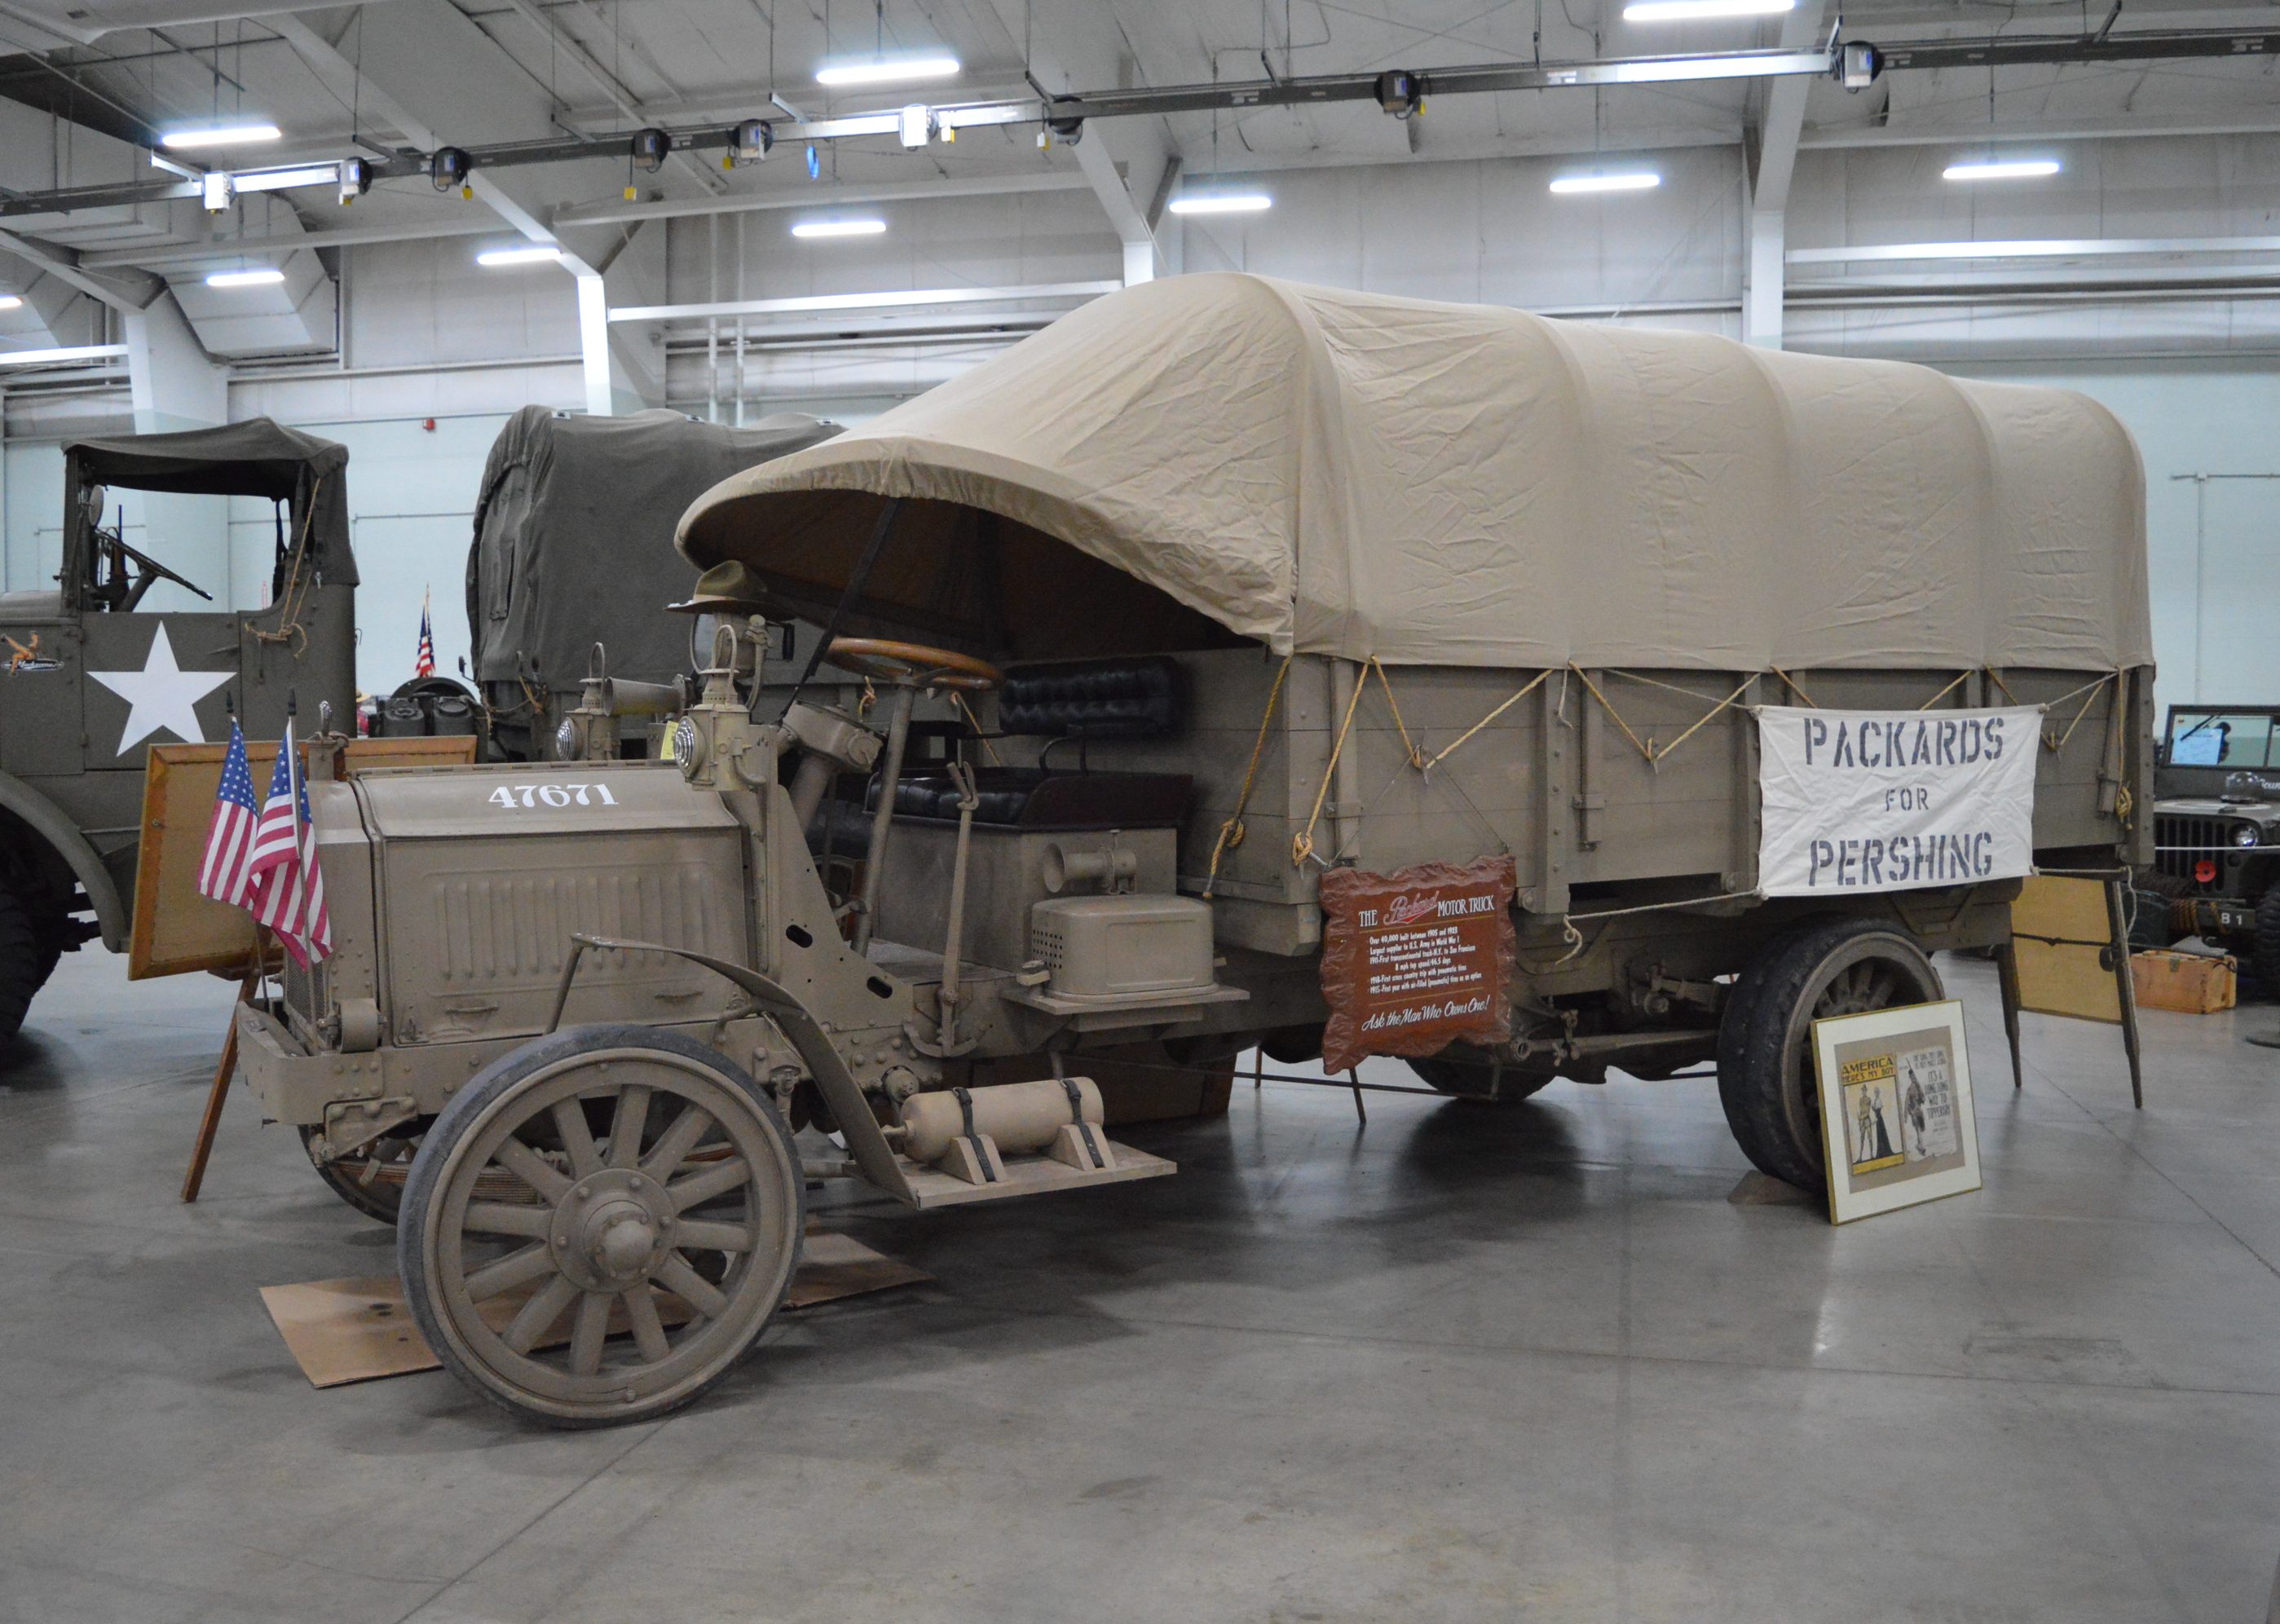 David Lockard's Packard truck on display at the 2019 Military Vehicle Preservation Association Convention in York, PA. (Anthony C. Hayes)